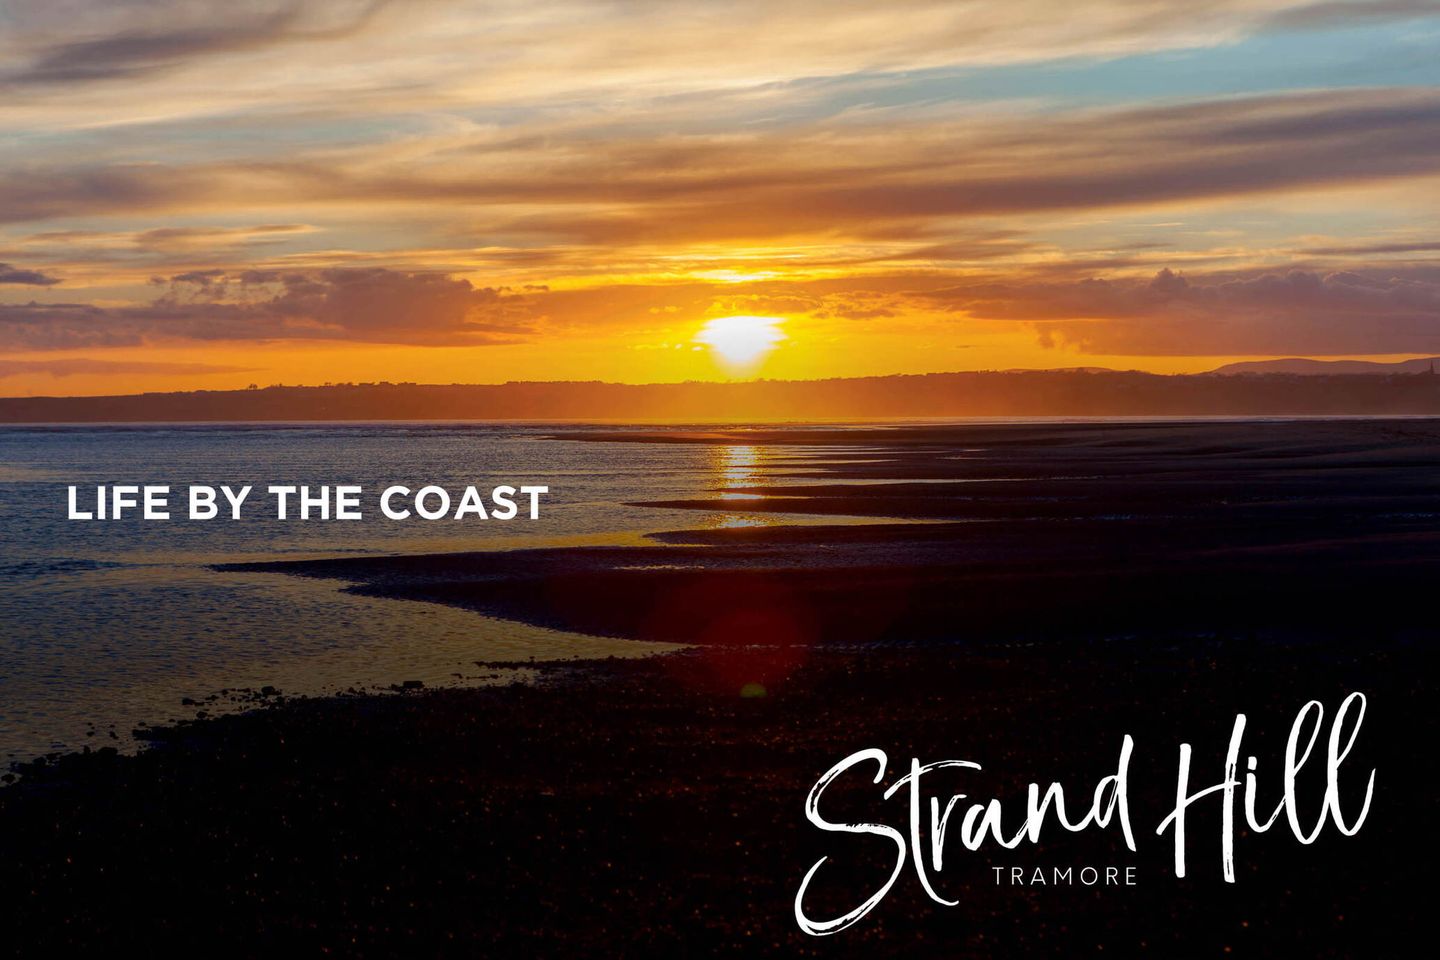 Strand Hill, Strand Hill, Tramore, Co. Waterford